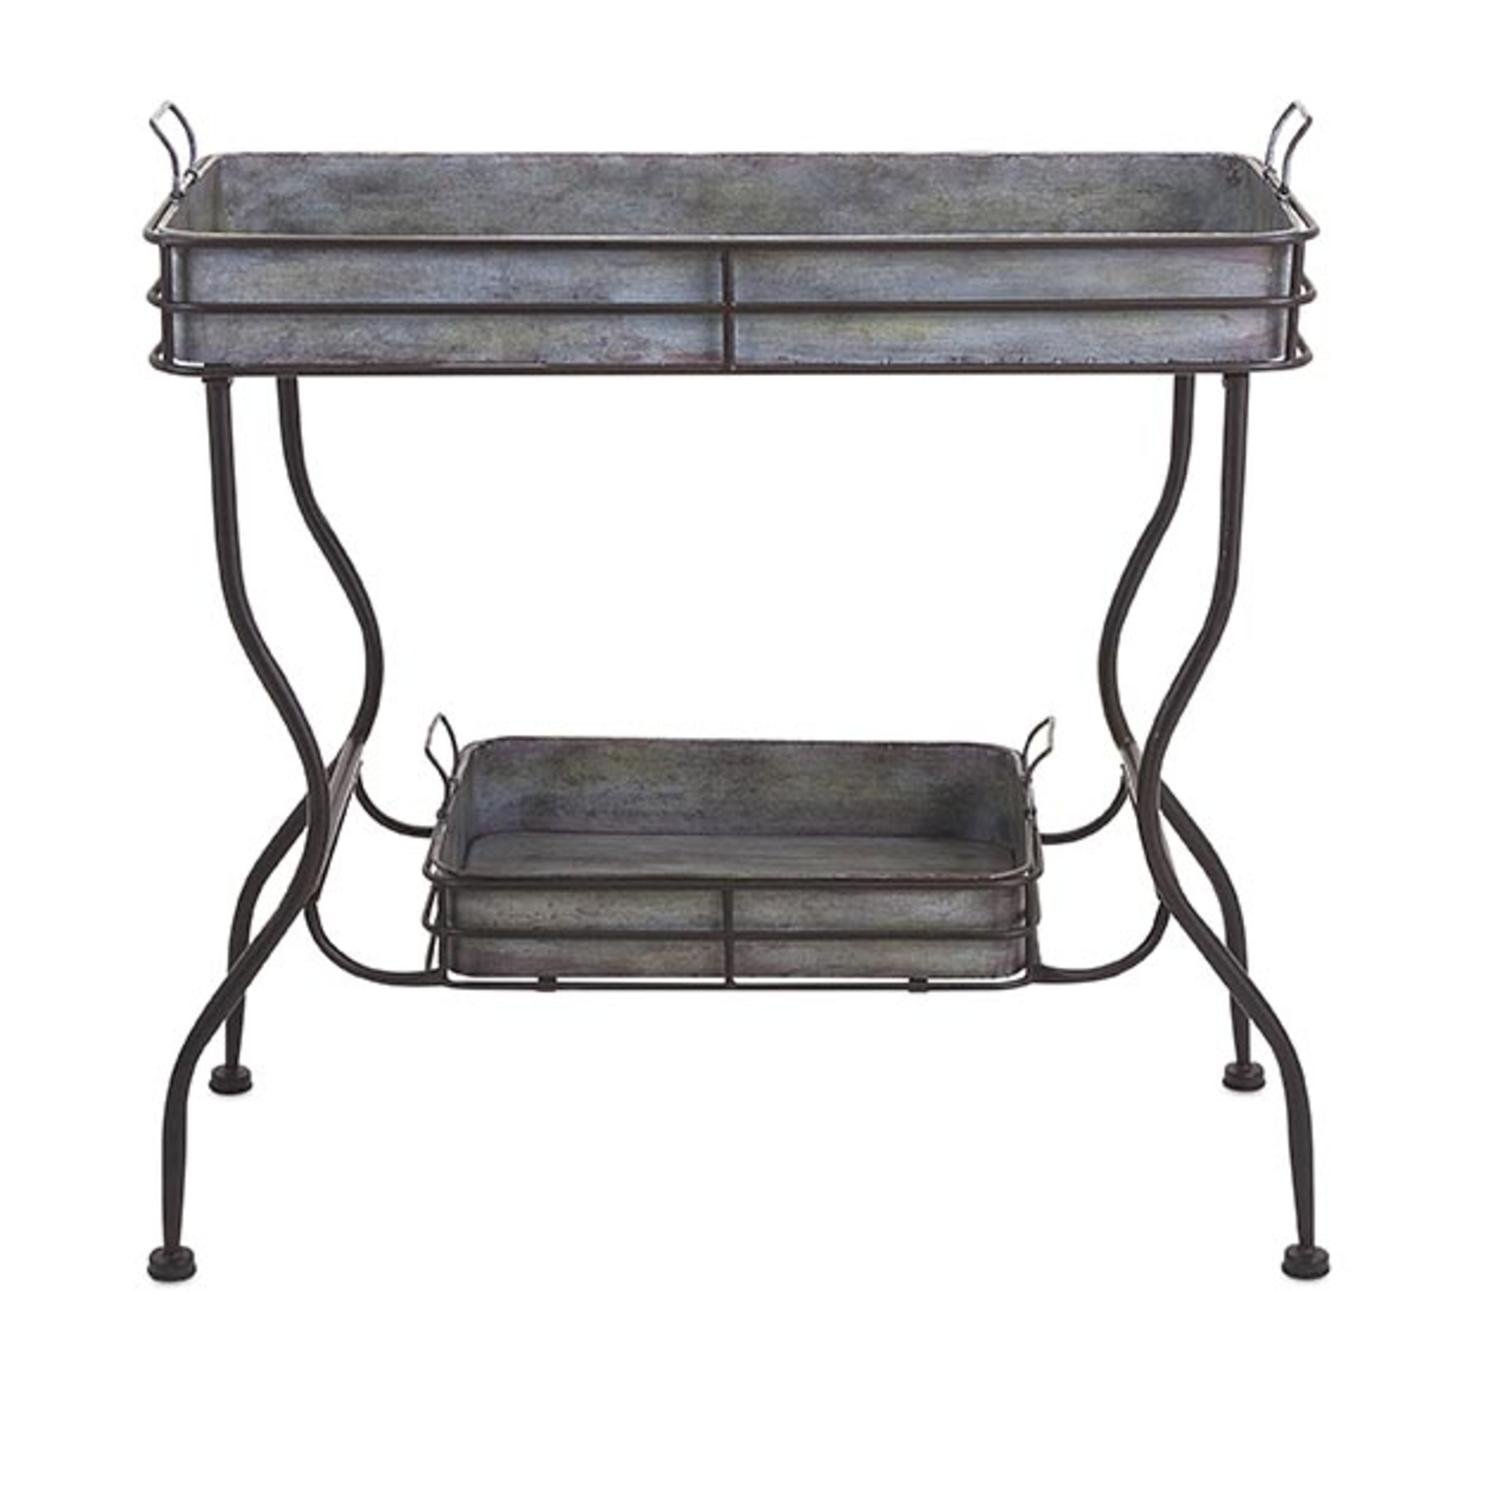 rustic silver galvanized metal accent table with removable serving trays free shipping today full futon cover hutch nautical desk lamp green end demilune console placemats wicker